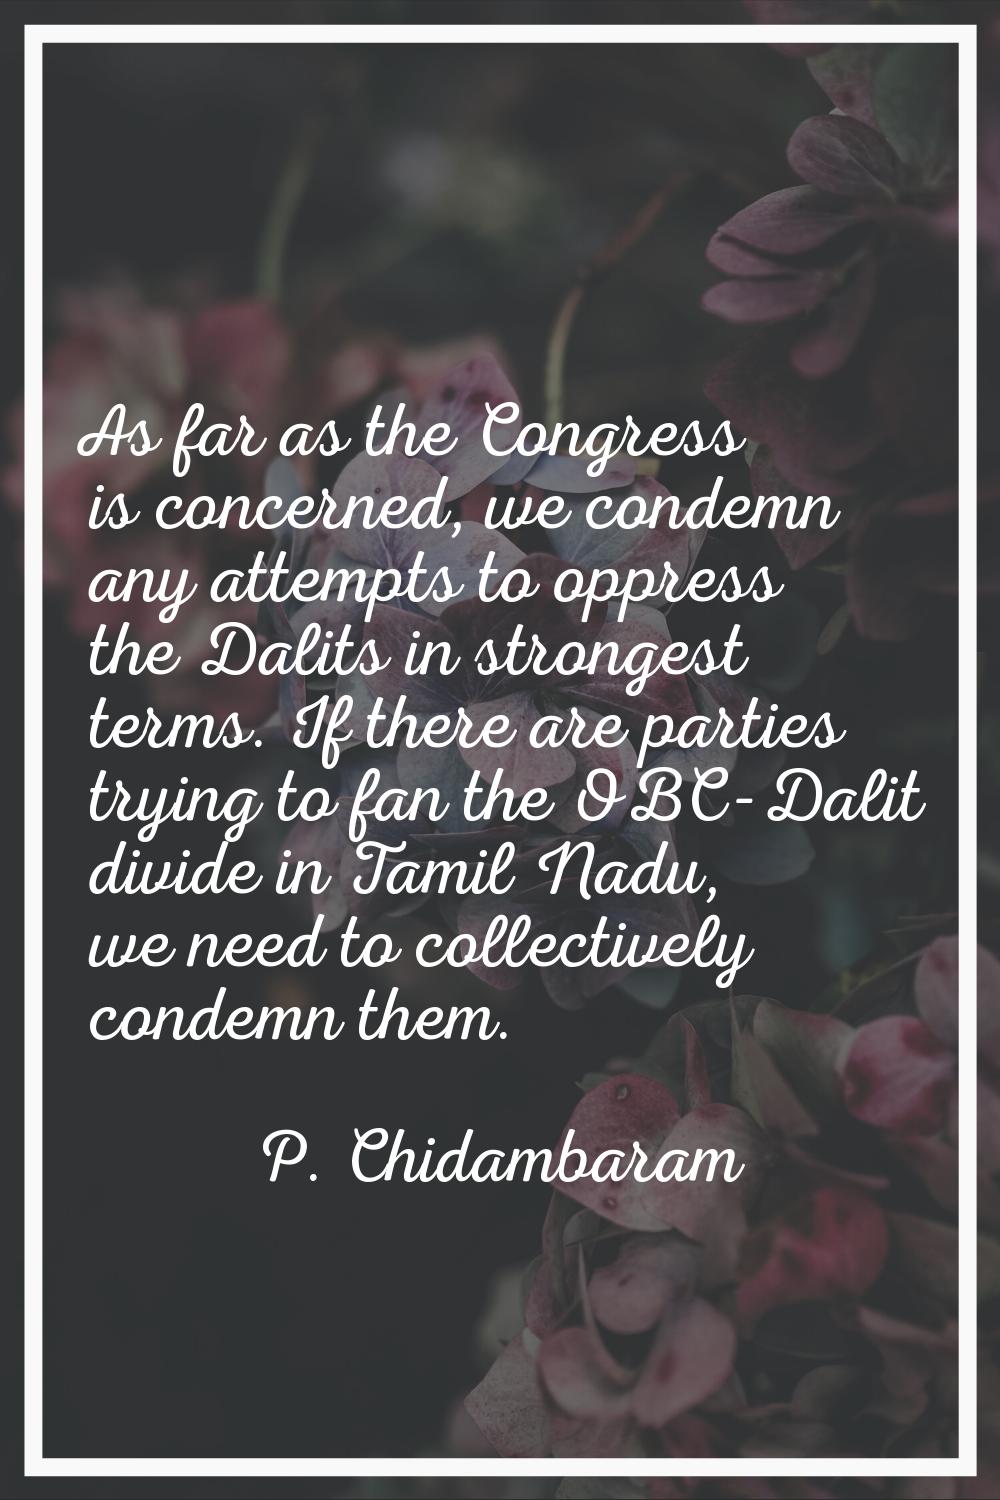 As far as the Congress is concerned, we condemn any attempts to oppress the Dalits in strongest ter